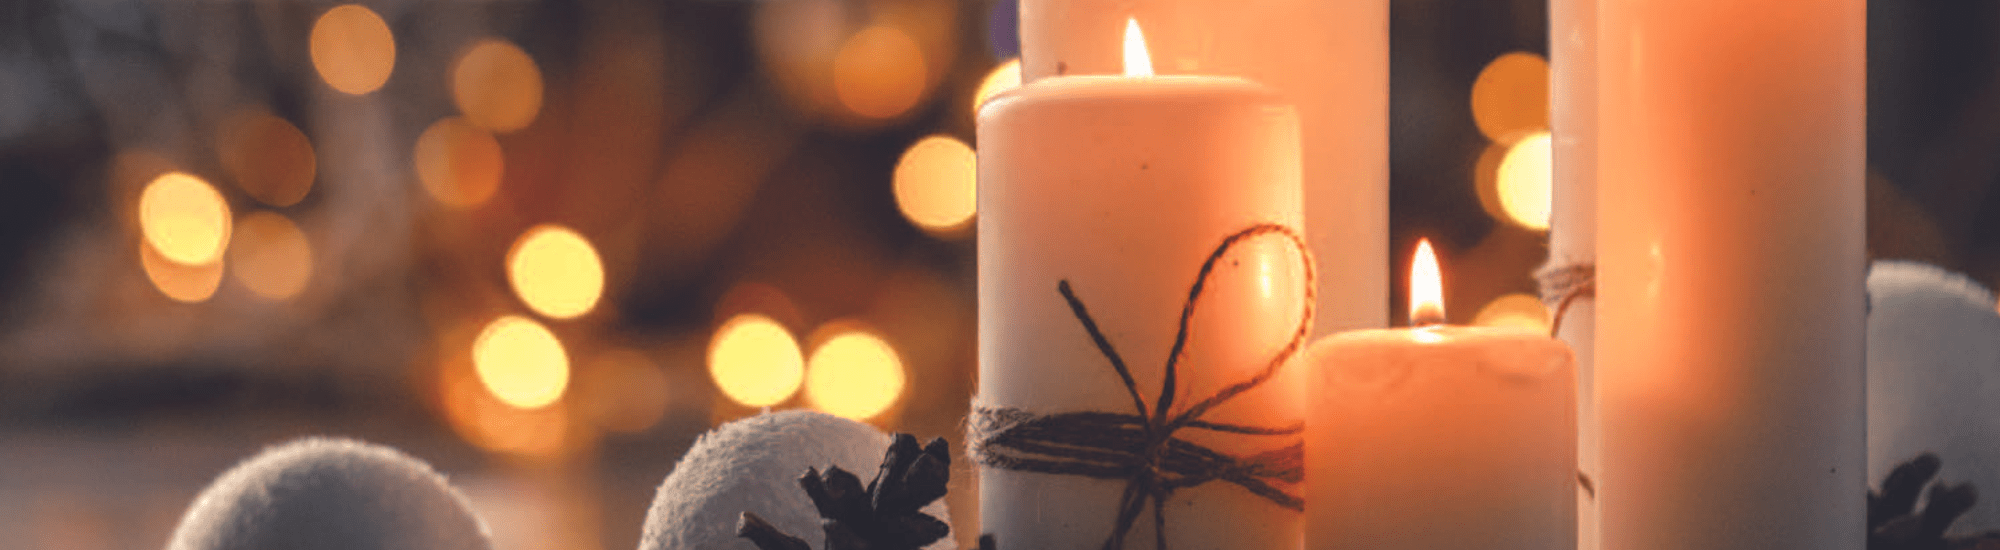 Lighted candles on Bokeh background